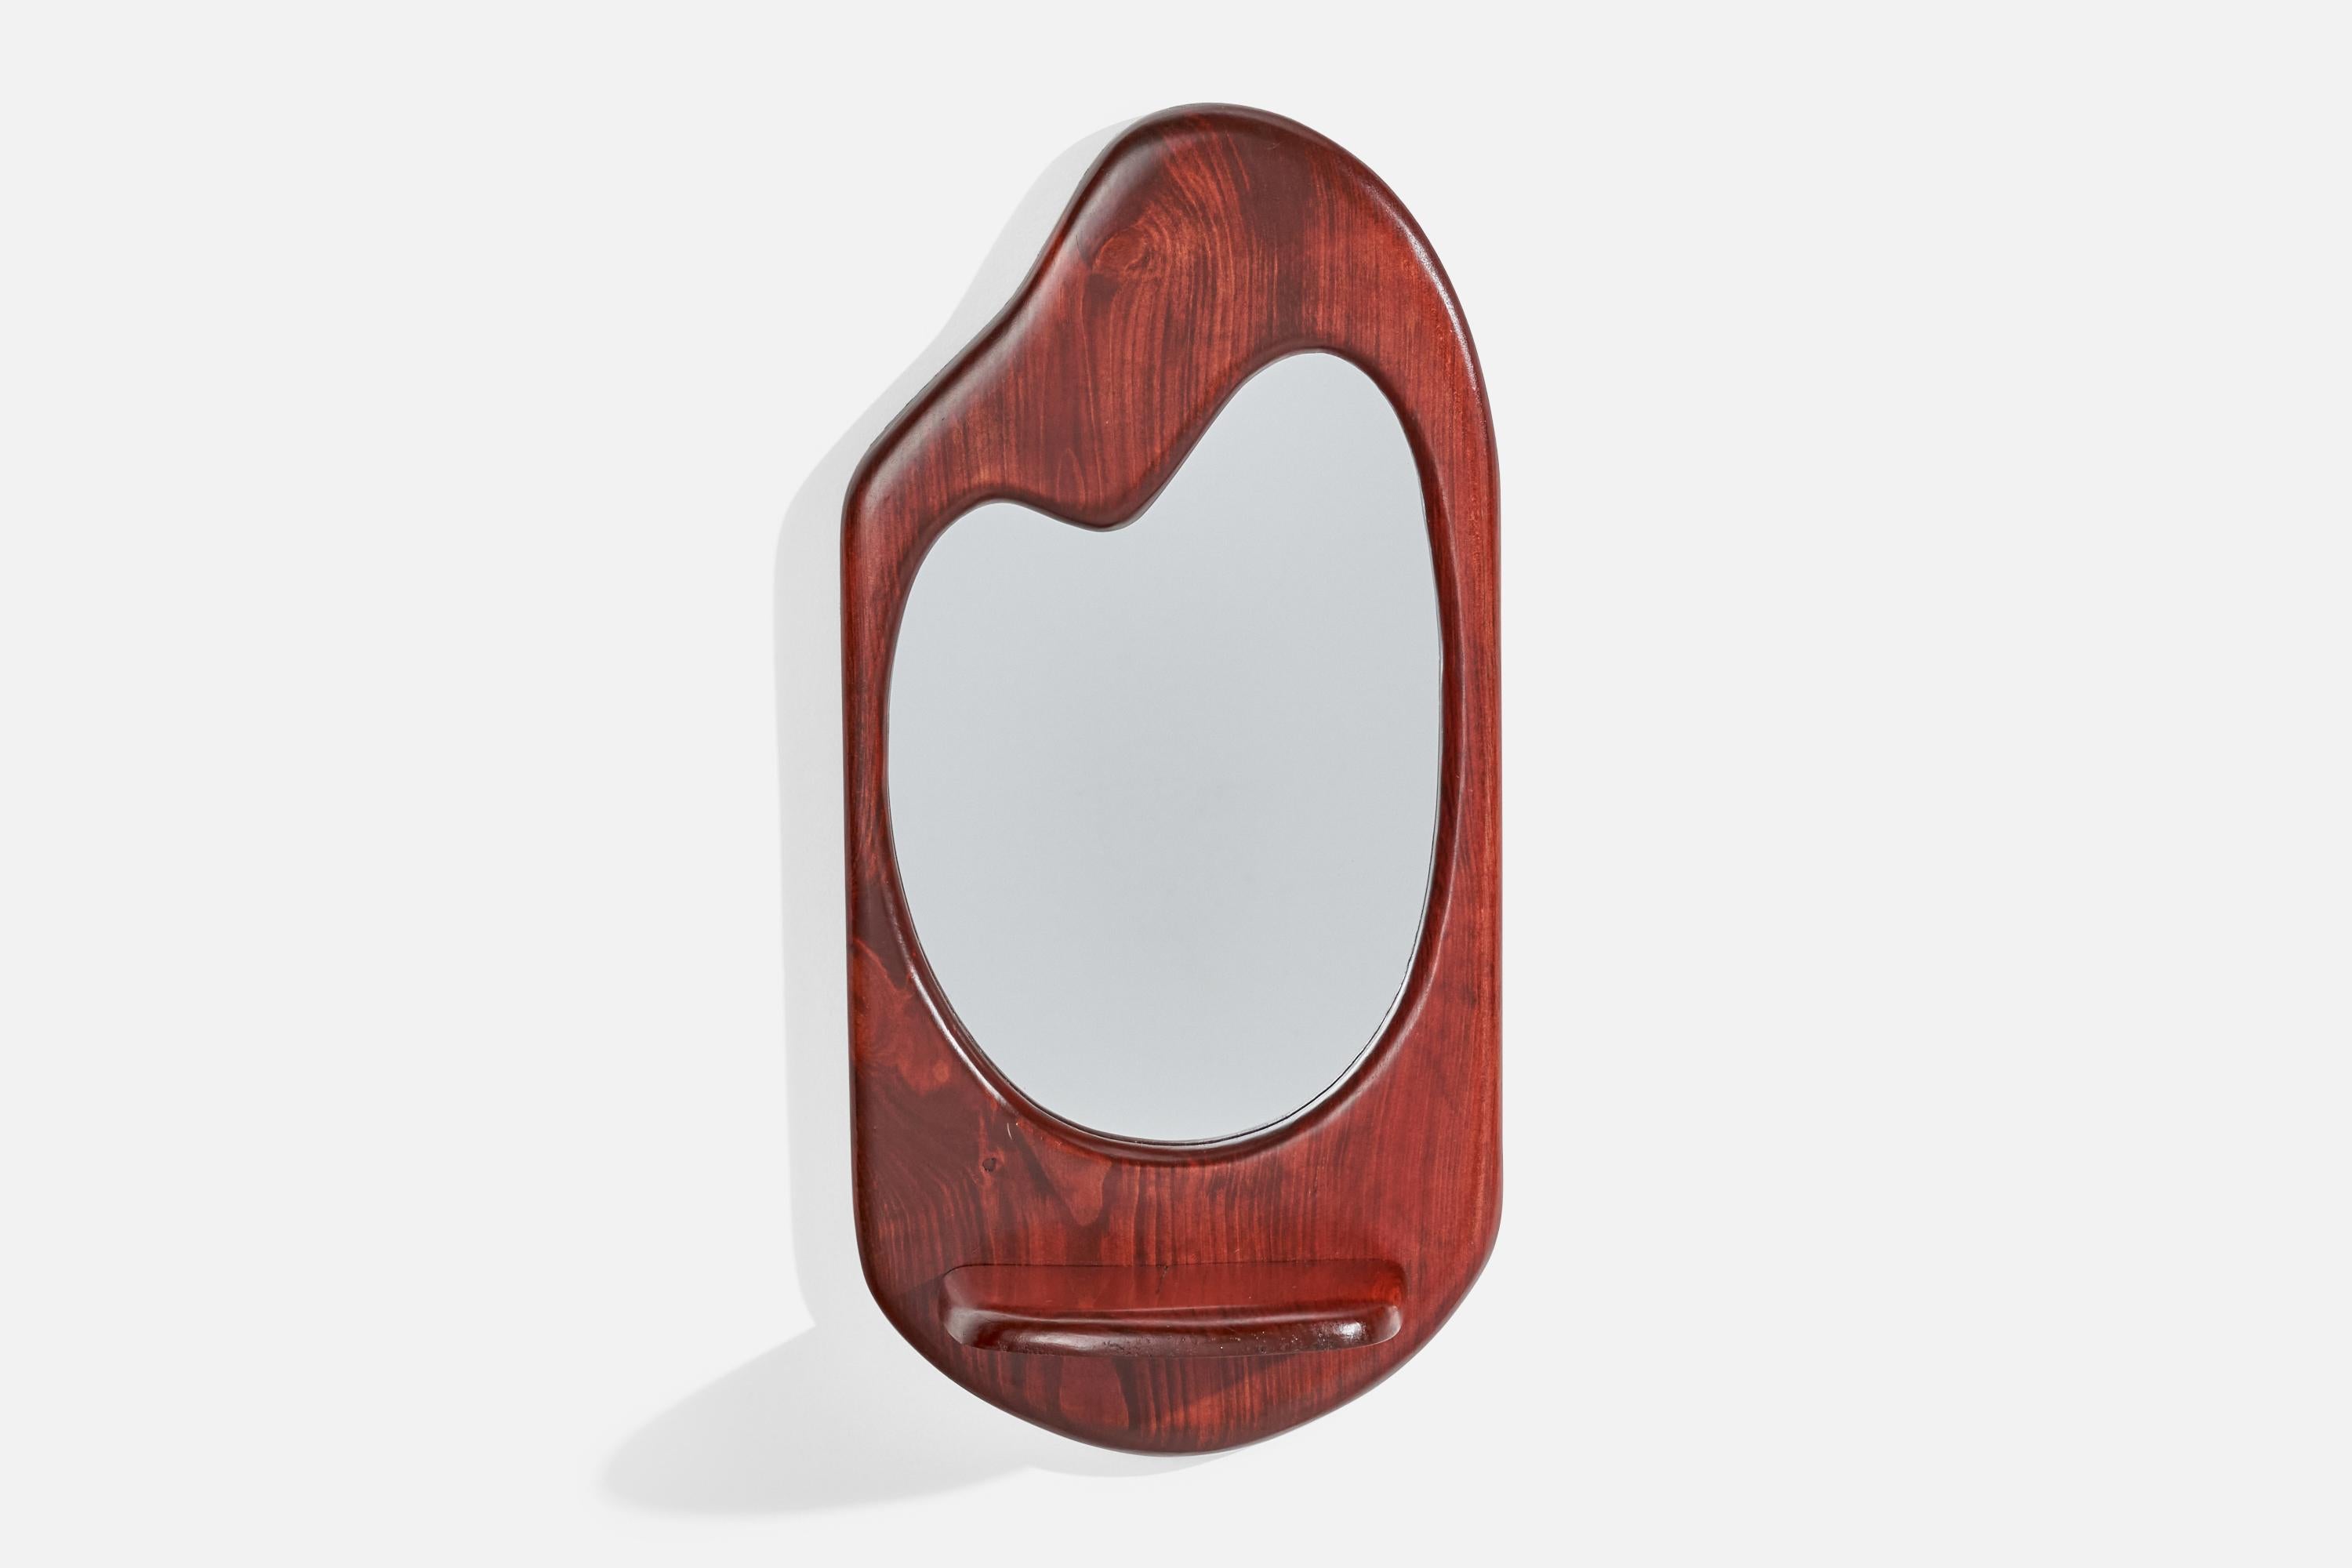 A stained oak freeform wall mirror with small shelf, designed and produced in the US, c. 1970s.